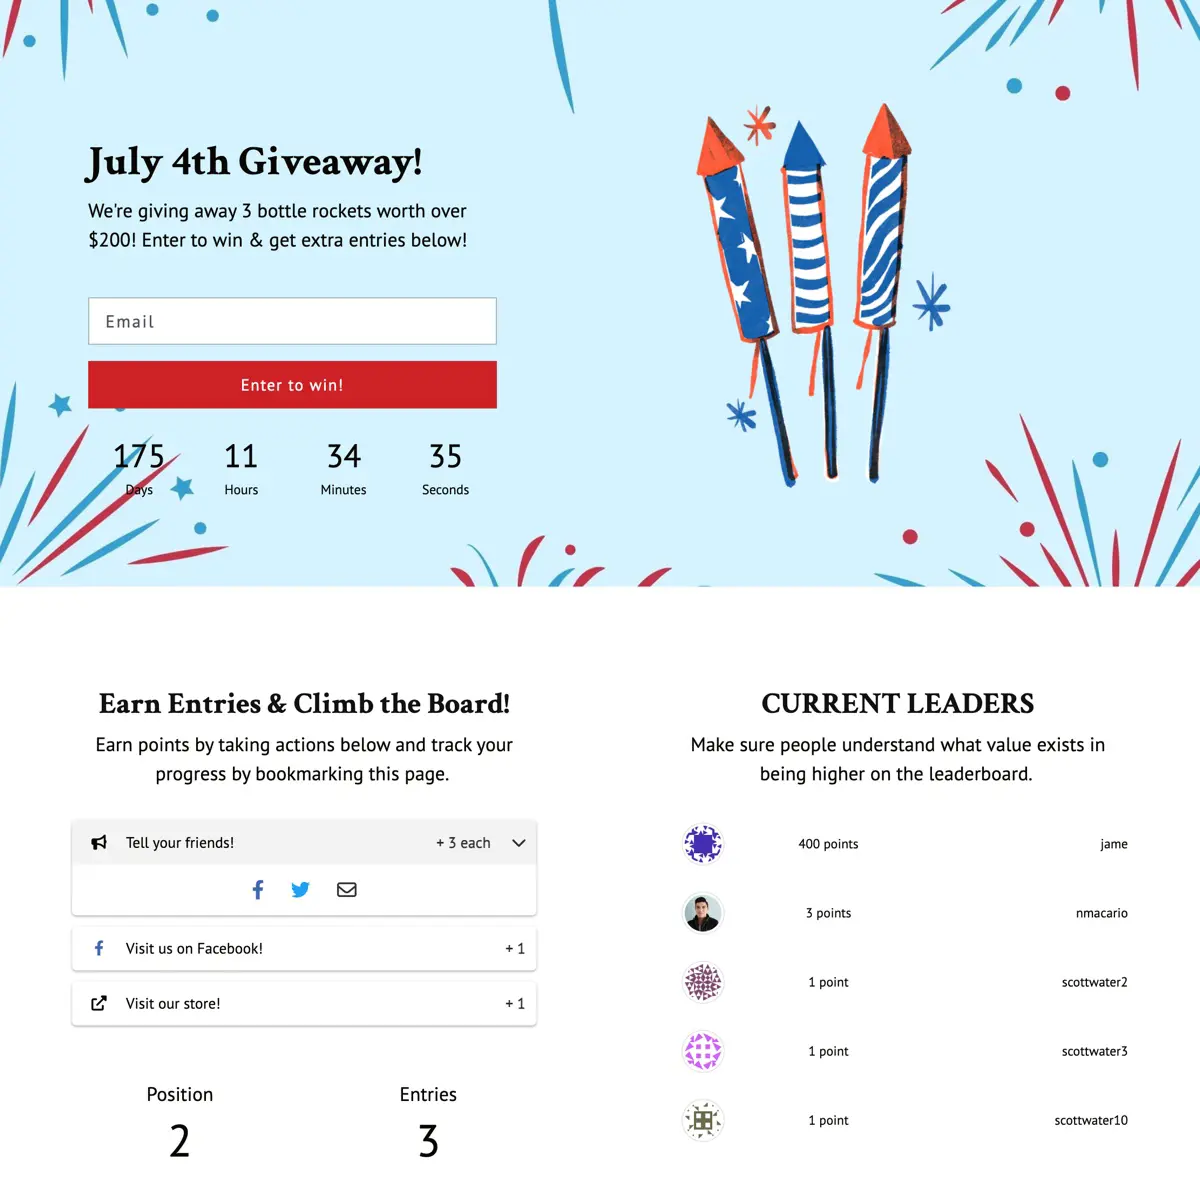 4th of July giveaway prize ideas